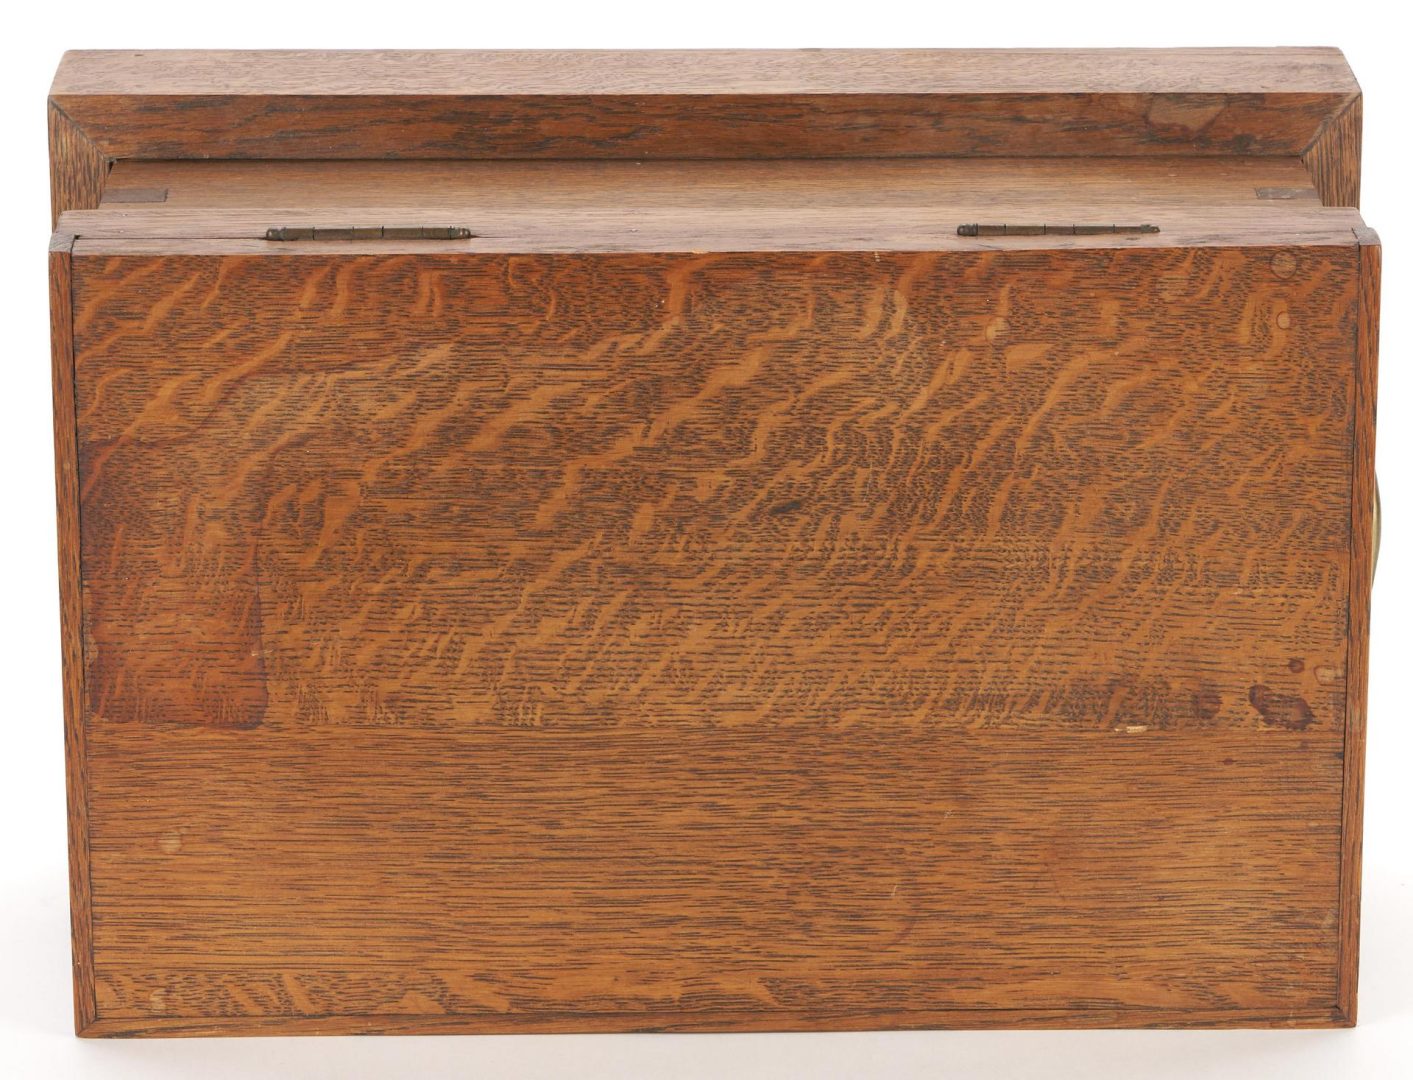 Lot 581: Antique Wooden Tool Caddy and Chest